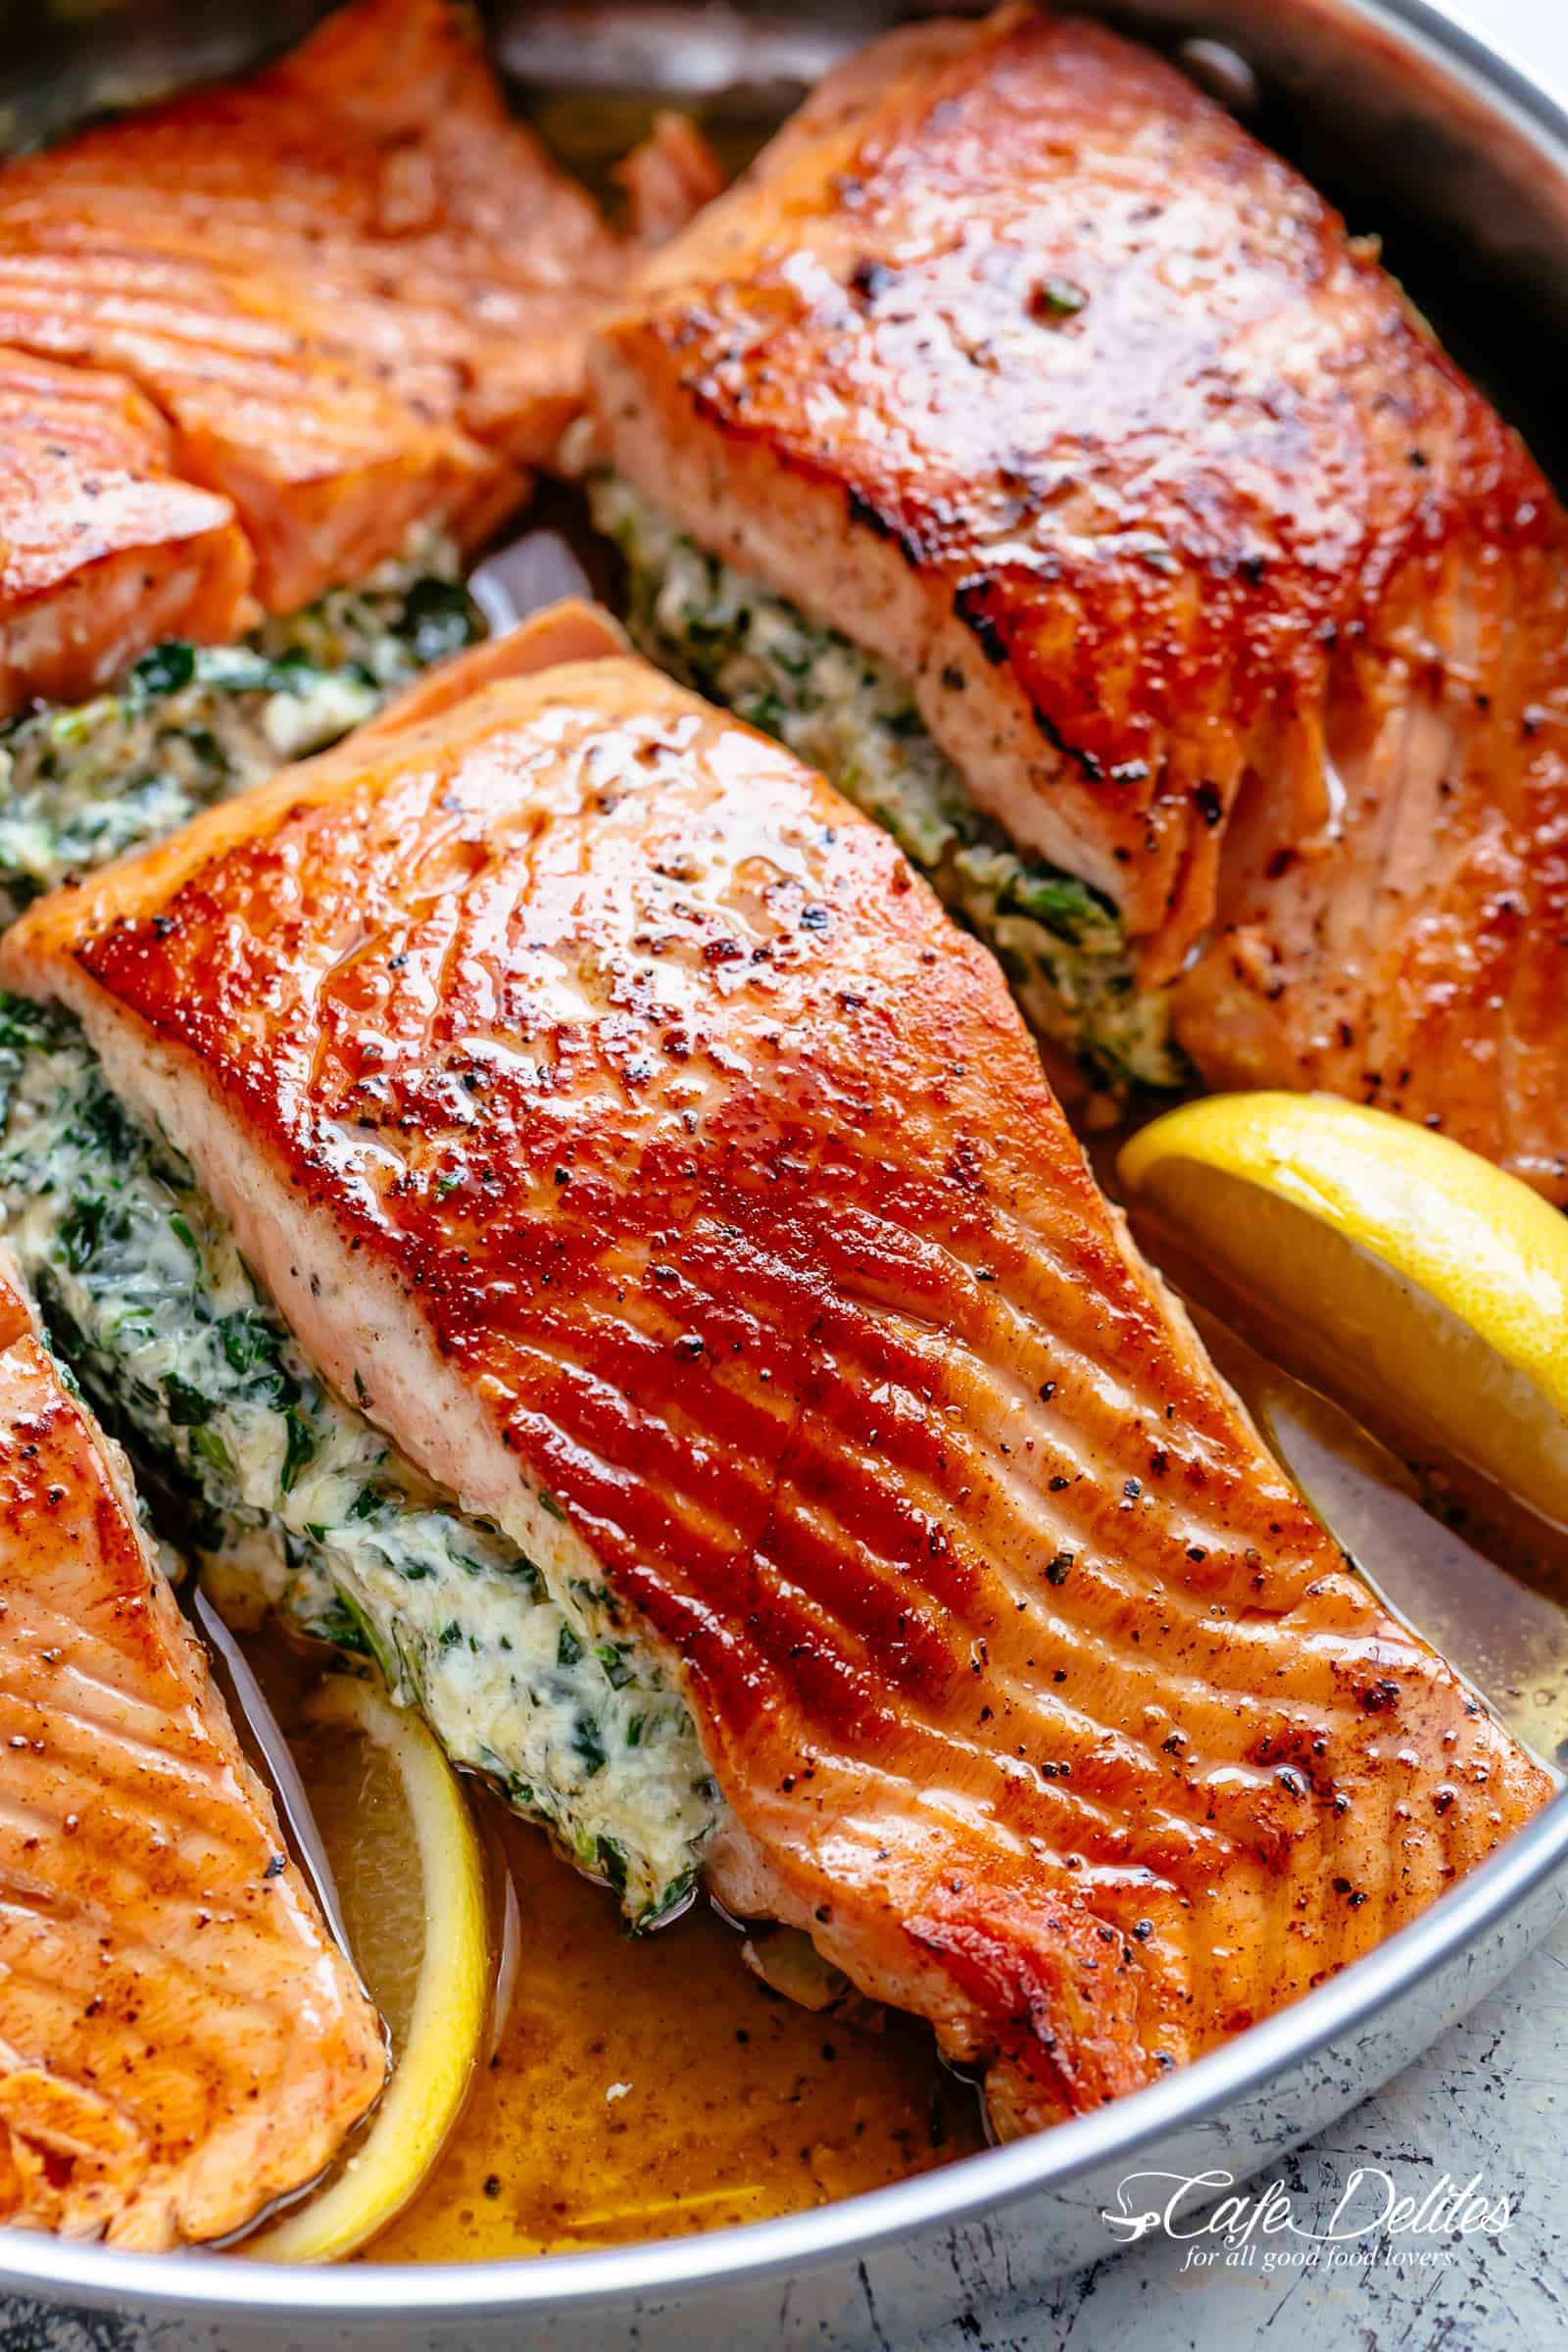 Creamy Spinach Stuffed Salmon in garlic butter is a new delicious way to enjoy salmon! Filled with cream cheese, spinach, parmesan cheese and garlic, this salmon beats than anything found in a restaurant. Your new favourite salmon recipe includes pan fried AND oven baked methods! | cafedelites.com